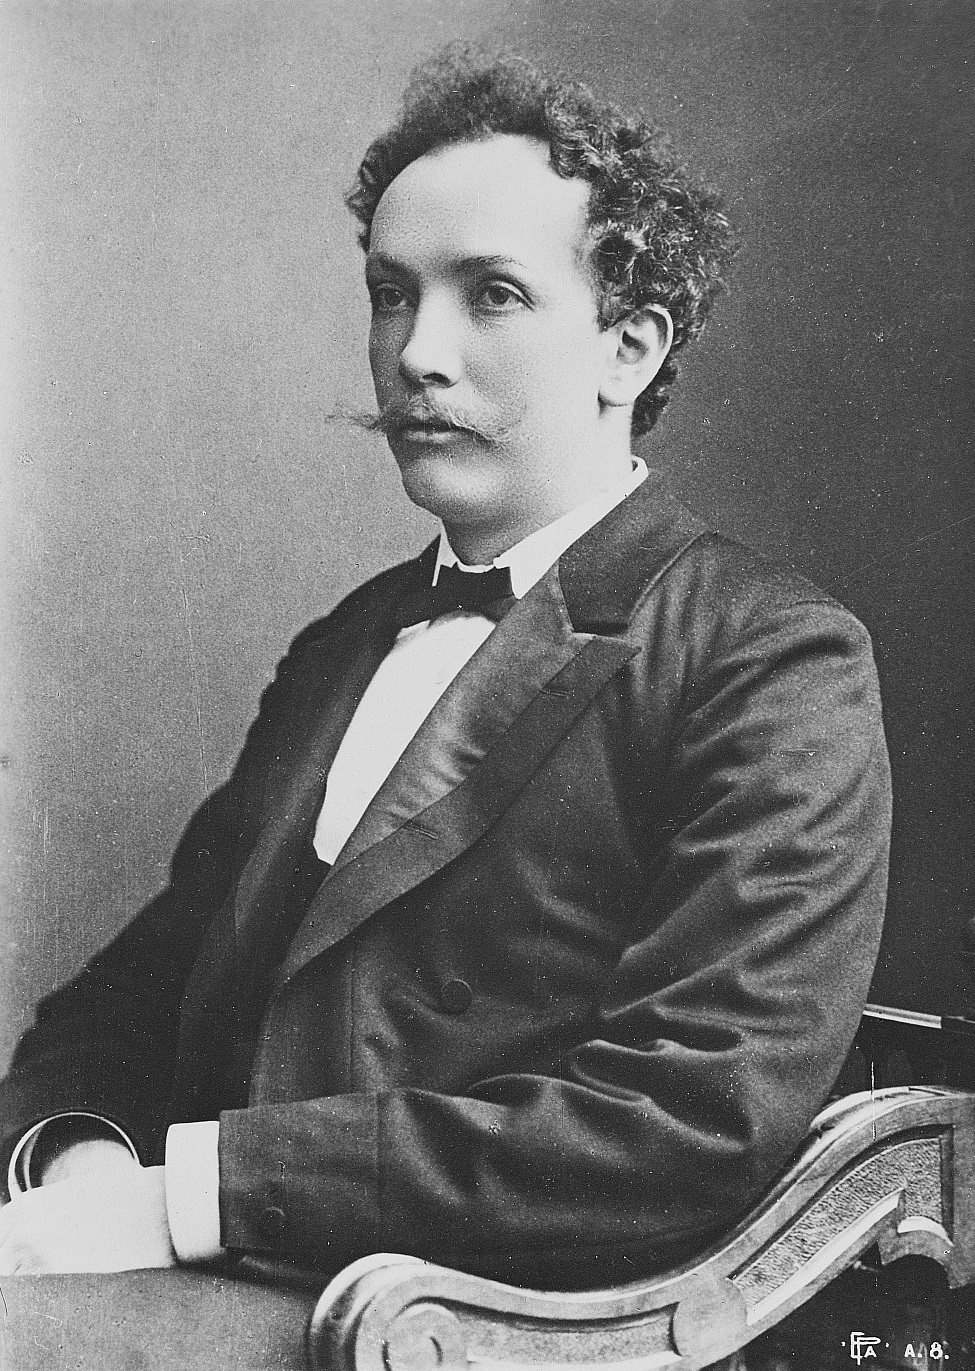 Photo of Richard Strauss sitting with moustache